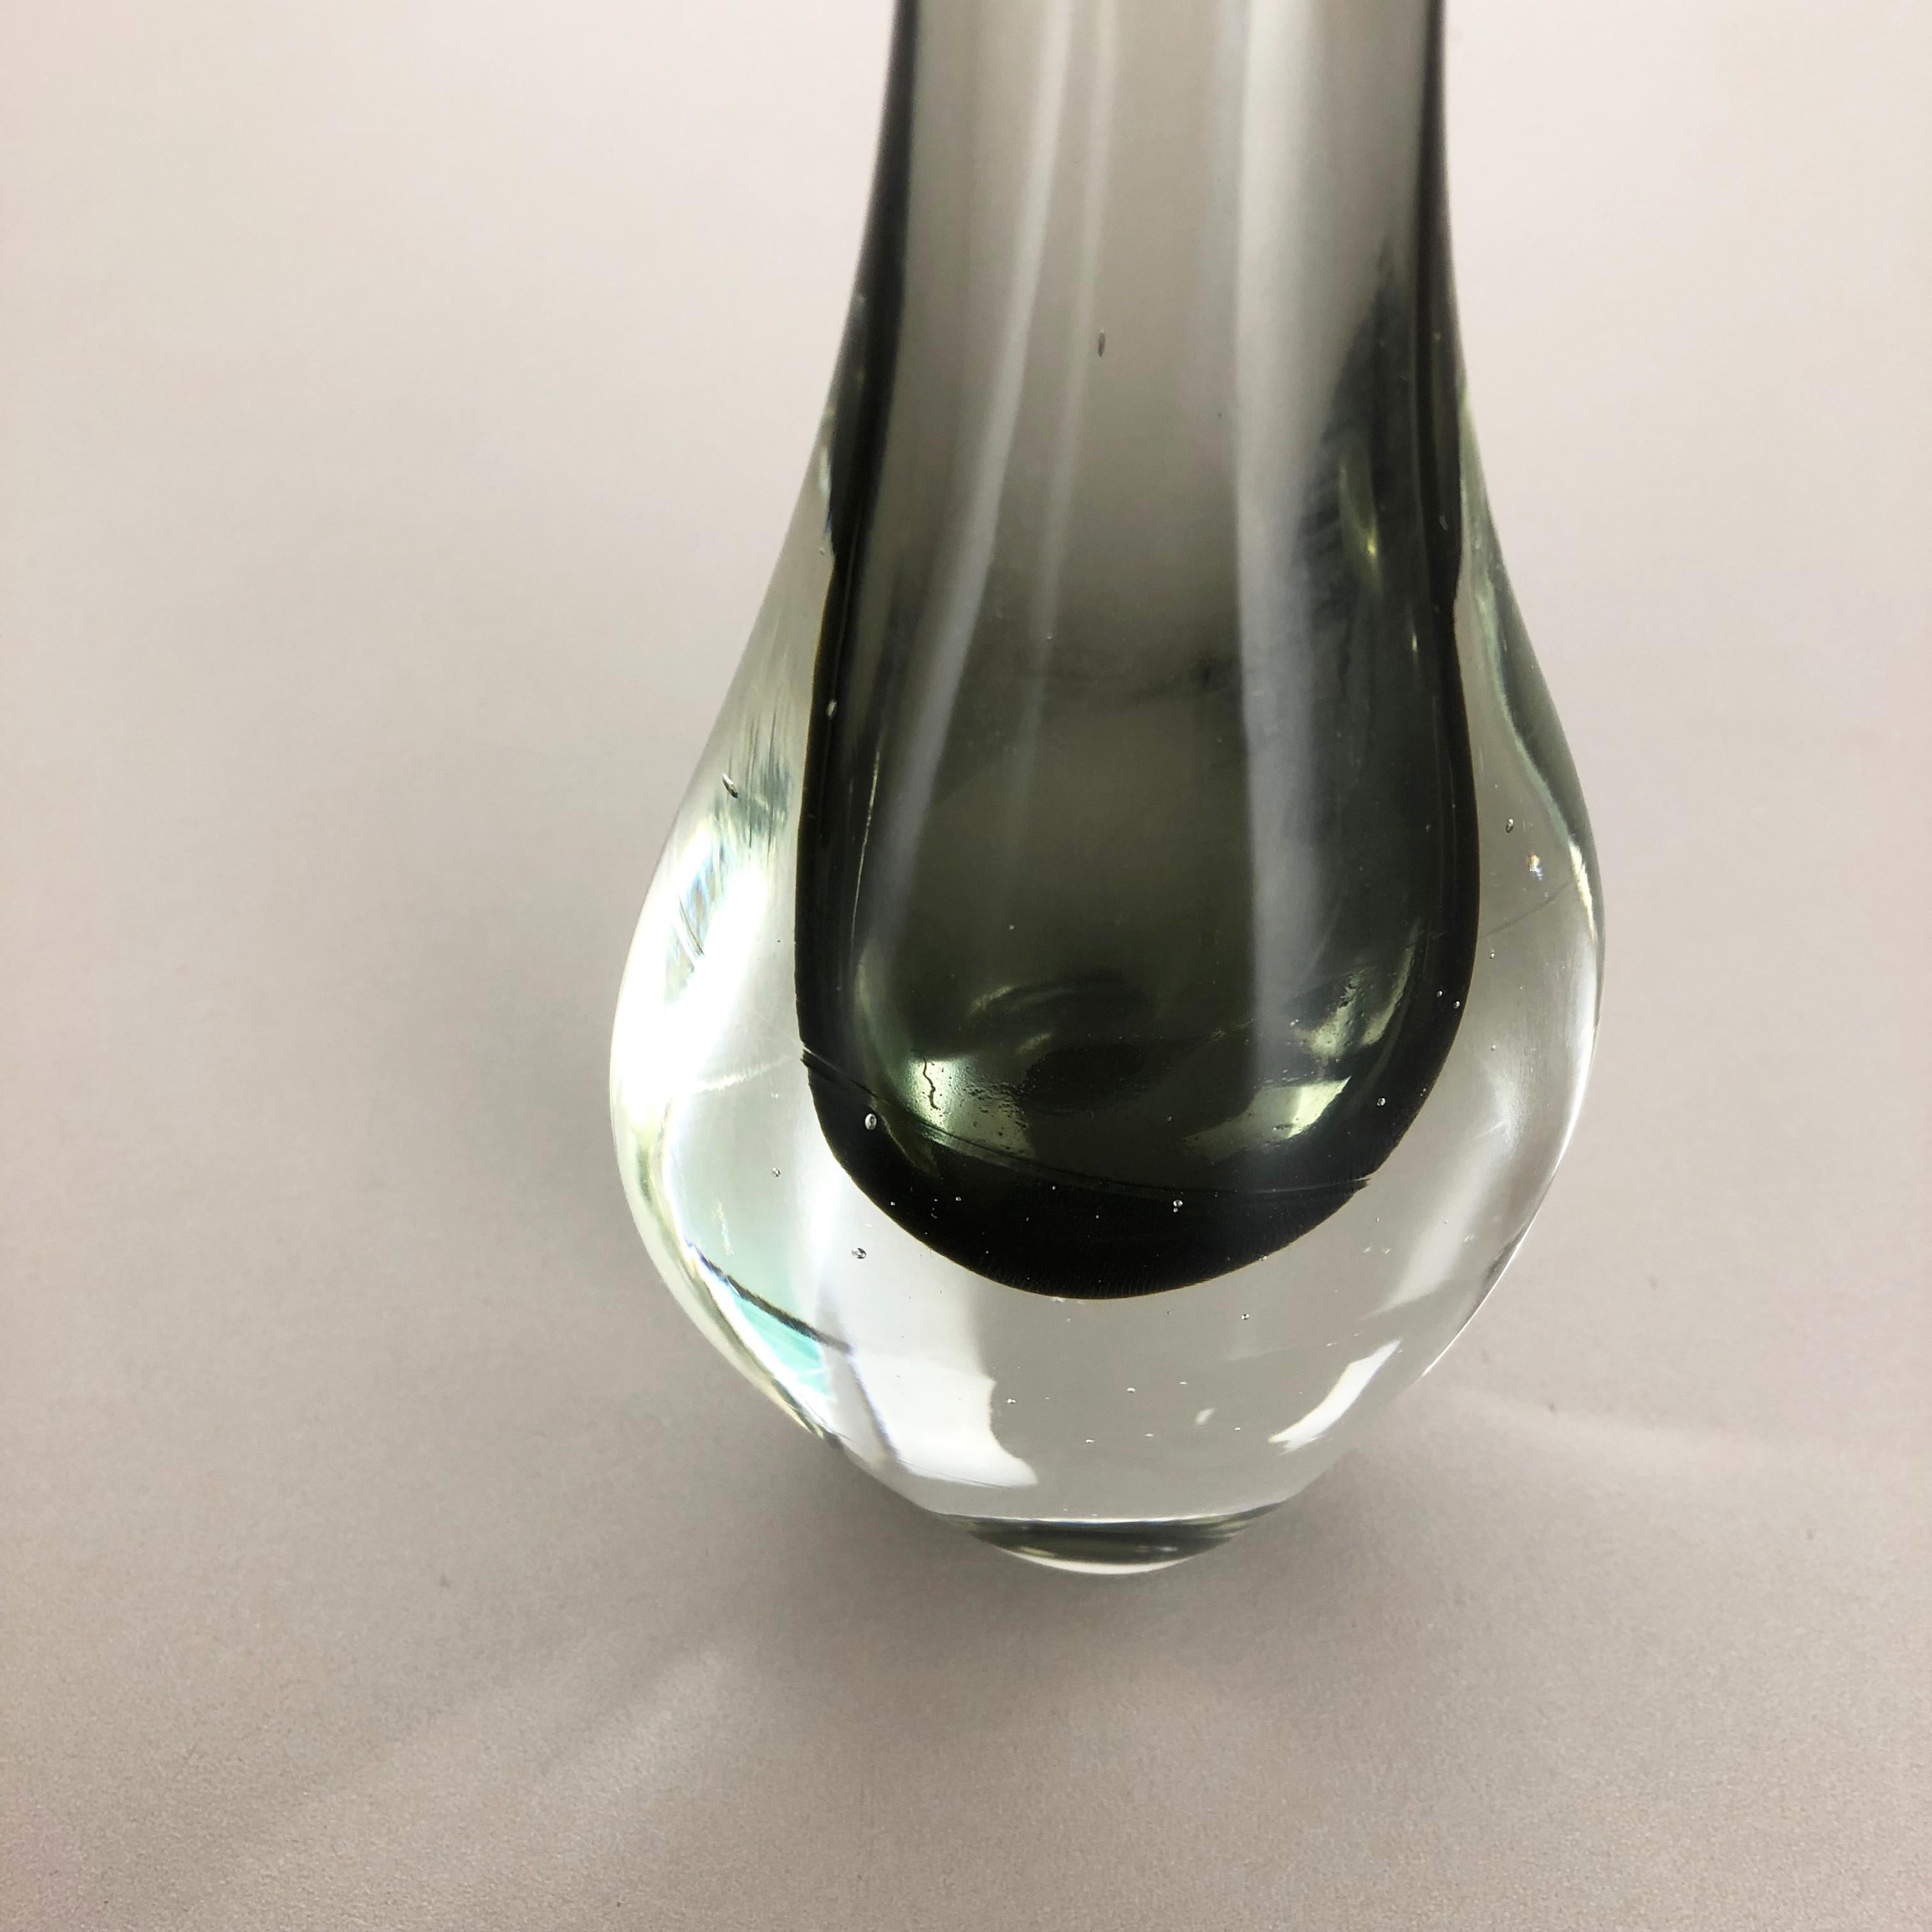 Rare Grey 1960s Murano Glass Sommerso Single-Stem Vase by Flavio Poli, Italy In Good Condition For Sale In Kirchlengern, DE